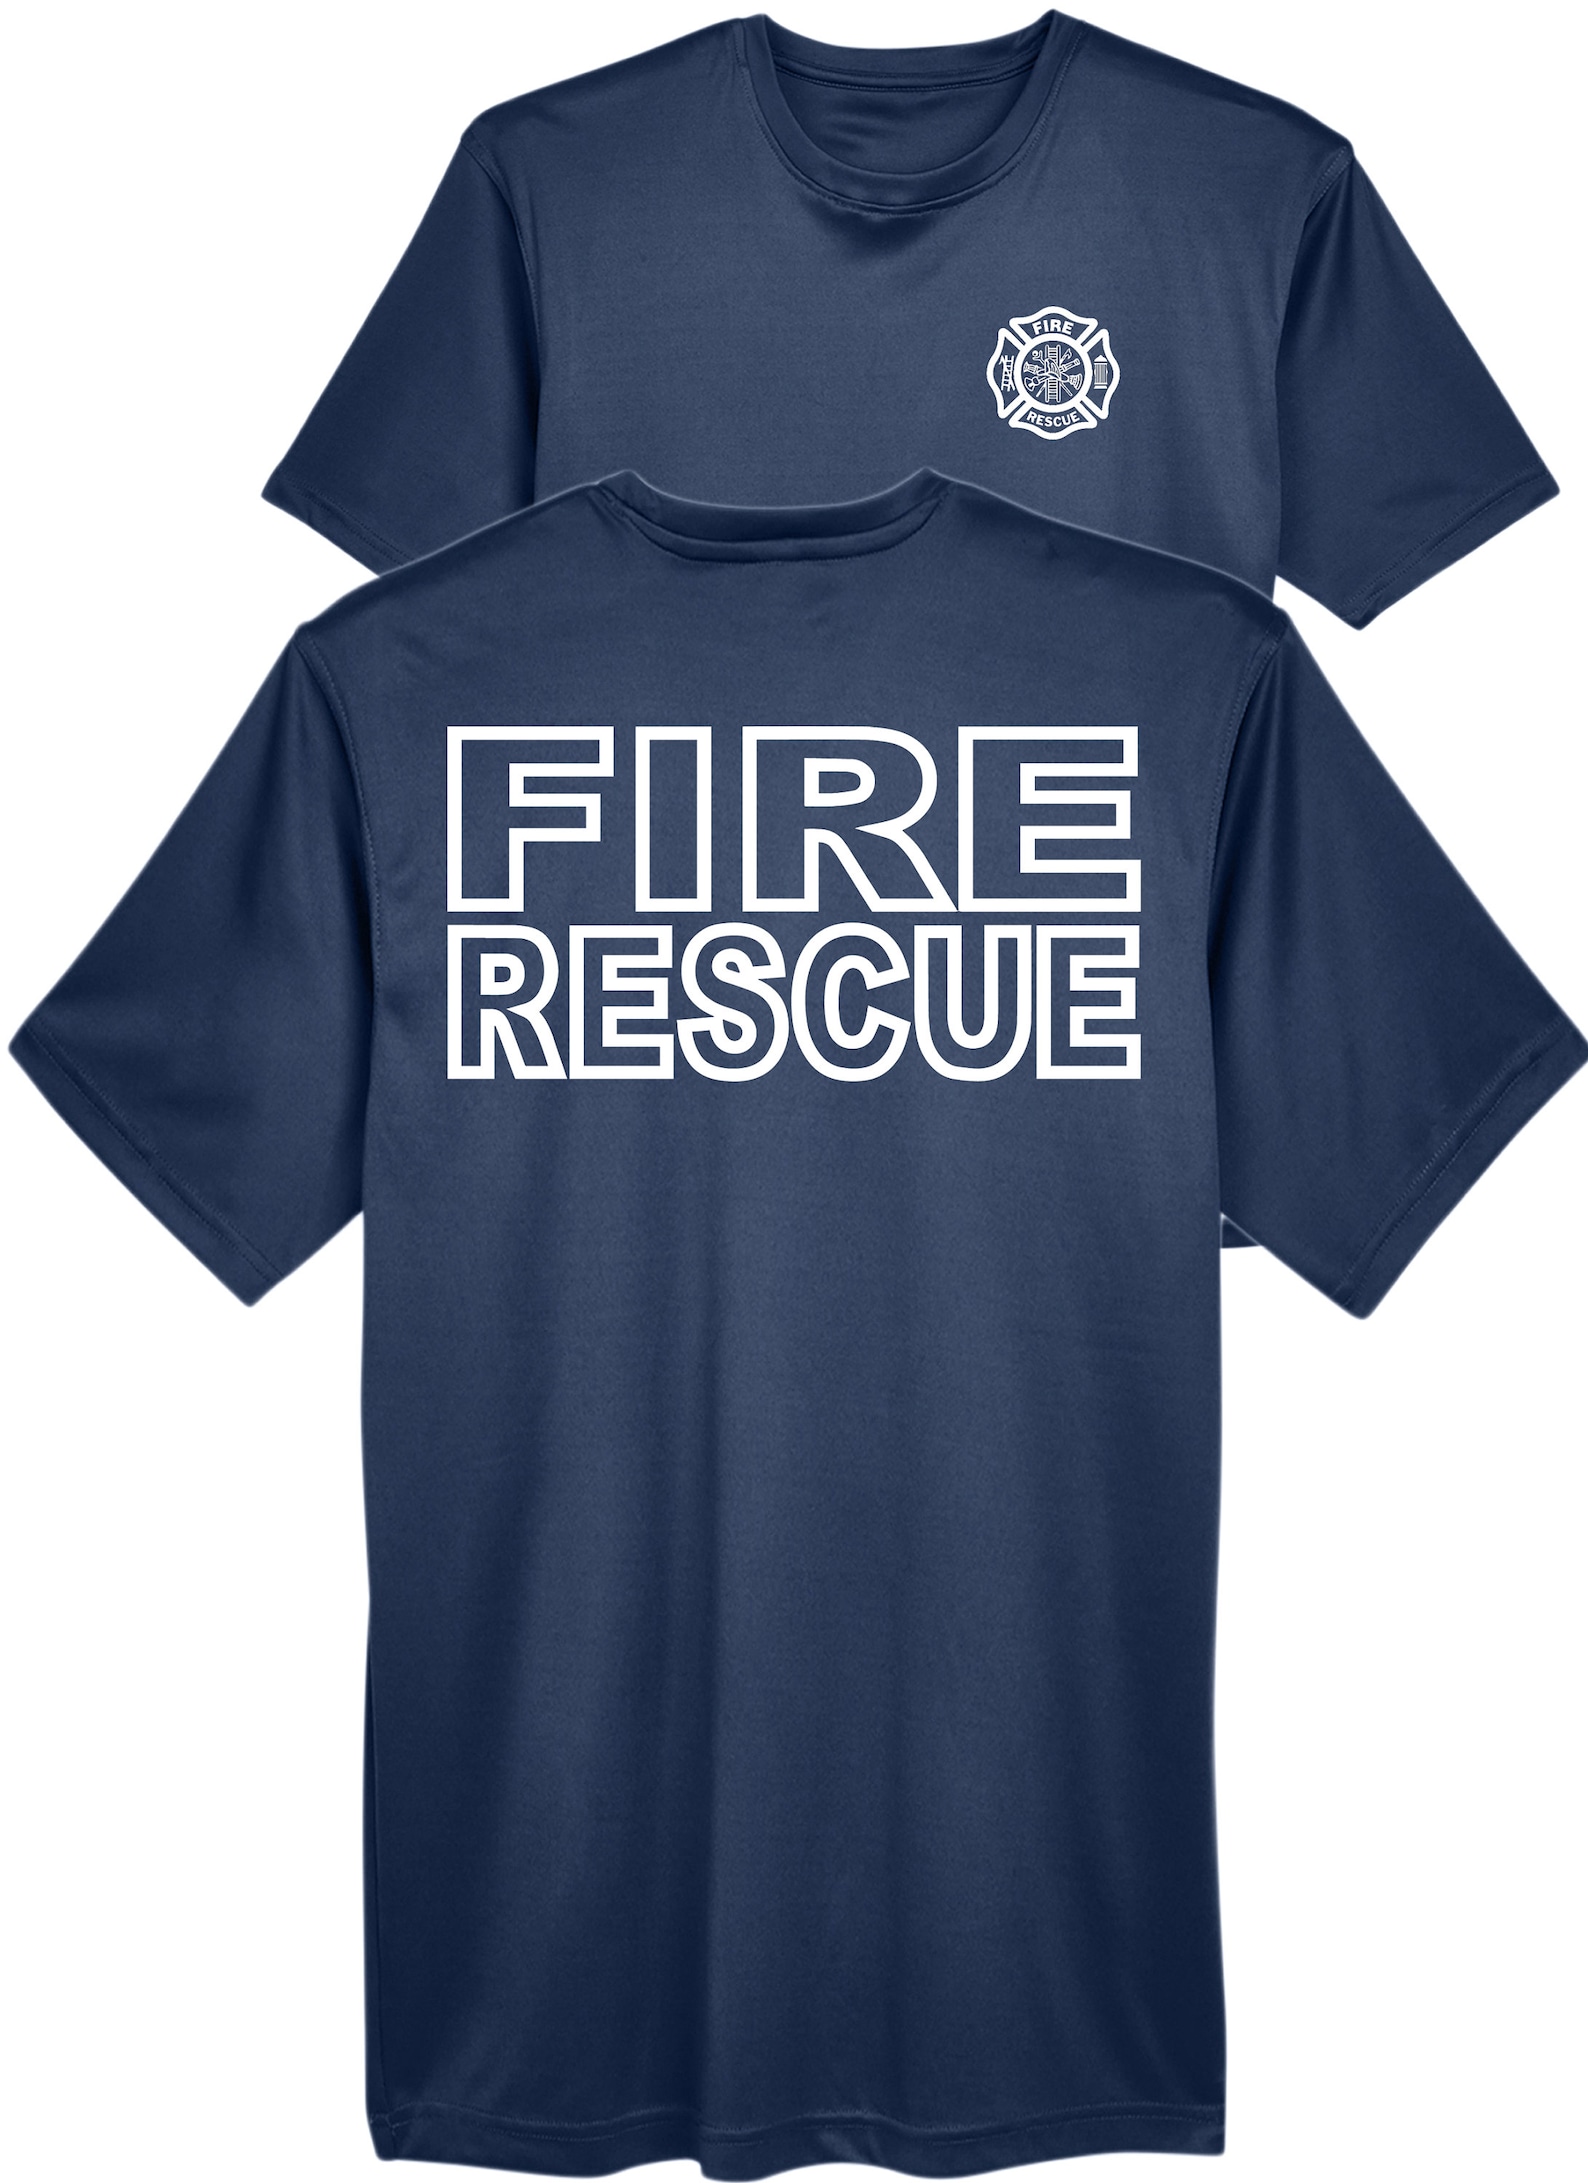 Fire Rescue T-Shirt Fire Department Duty Firefighter Adult | Etsy